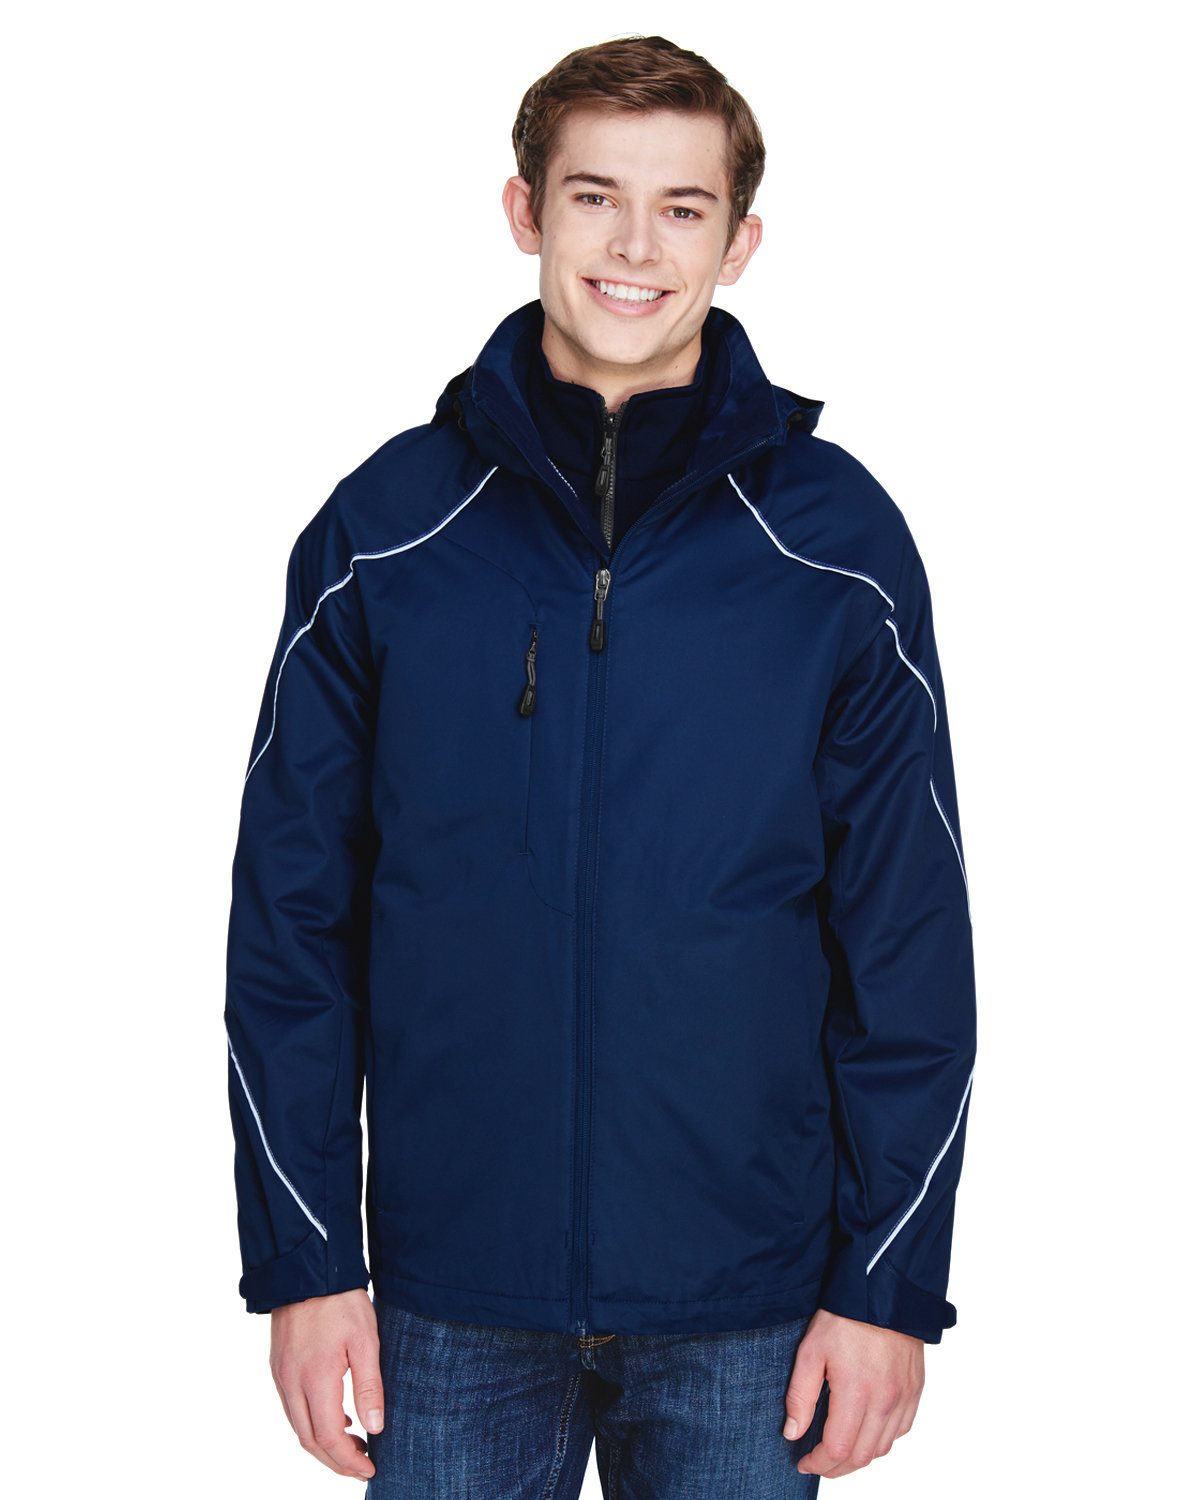 North End Men's Angle 3-in-1 Jacket with Bonded Fleece Liner night 